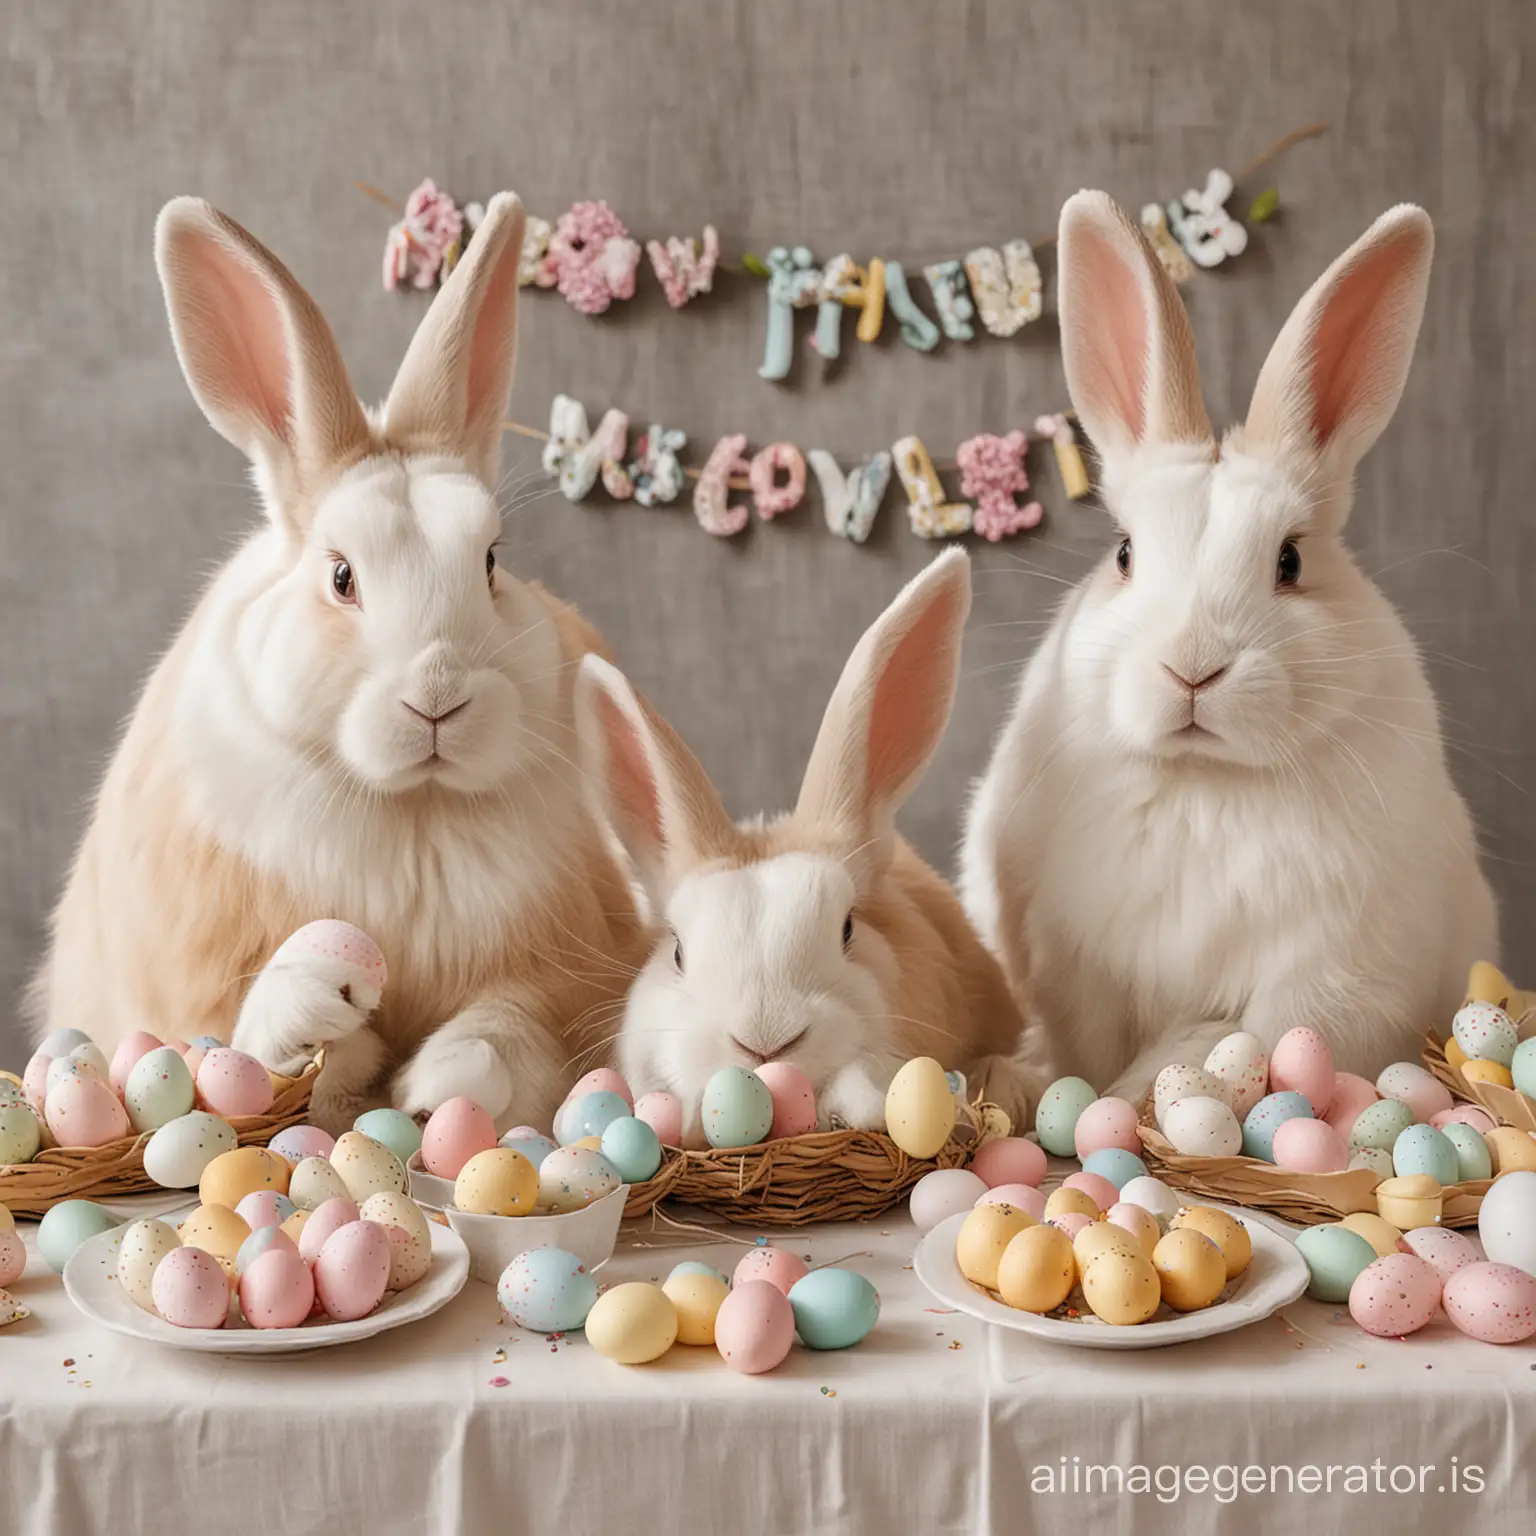 Colorful-Easter-Celebration-with-Adorable-Bunnies